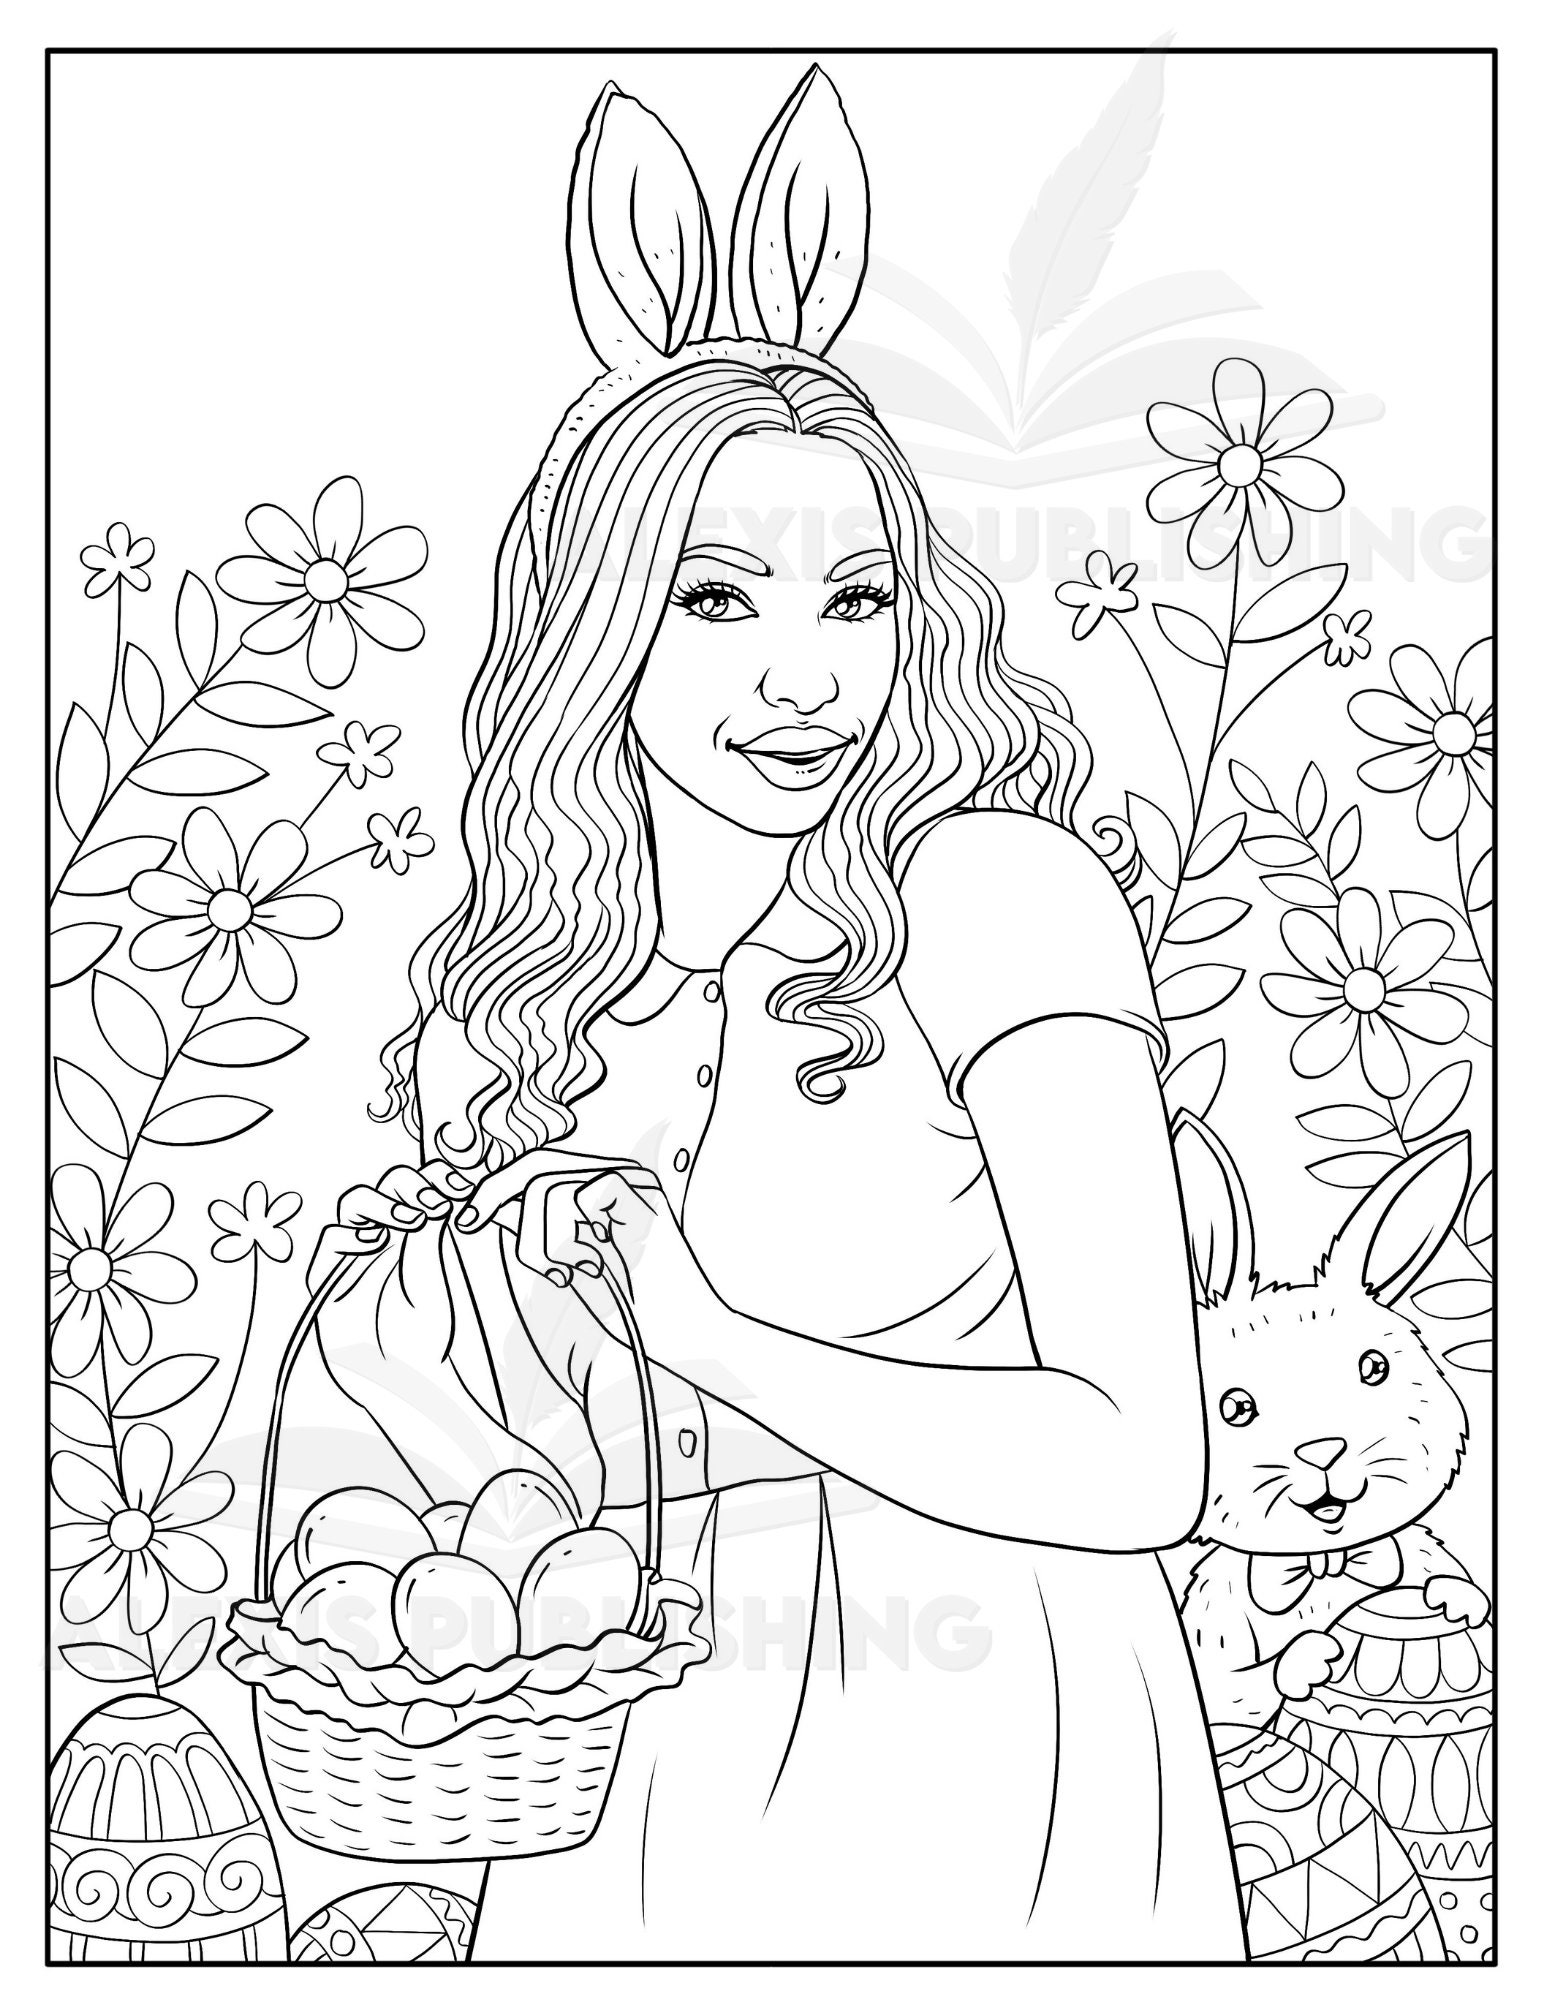 Black Women Adult Coloring Page - Melanin Girl Illustration | For Stress  Relieving and Relaxation | Instant Download (Printable Page)